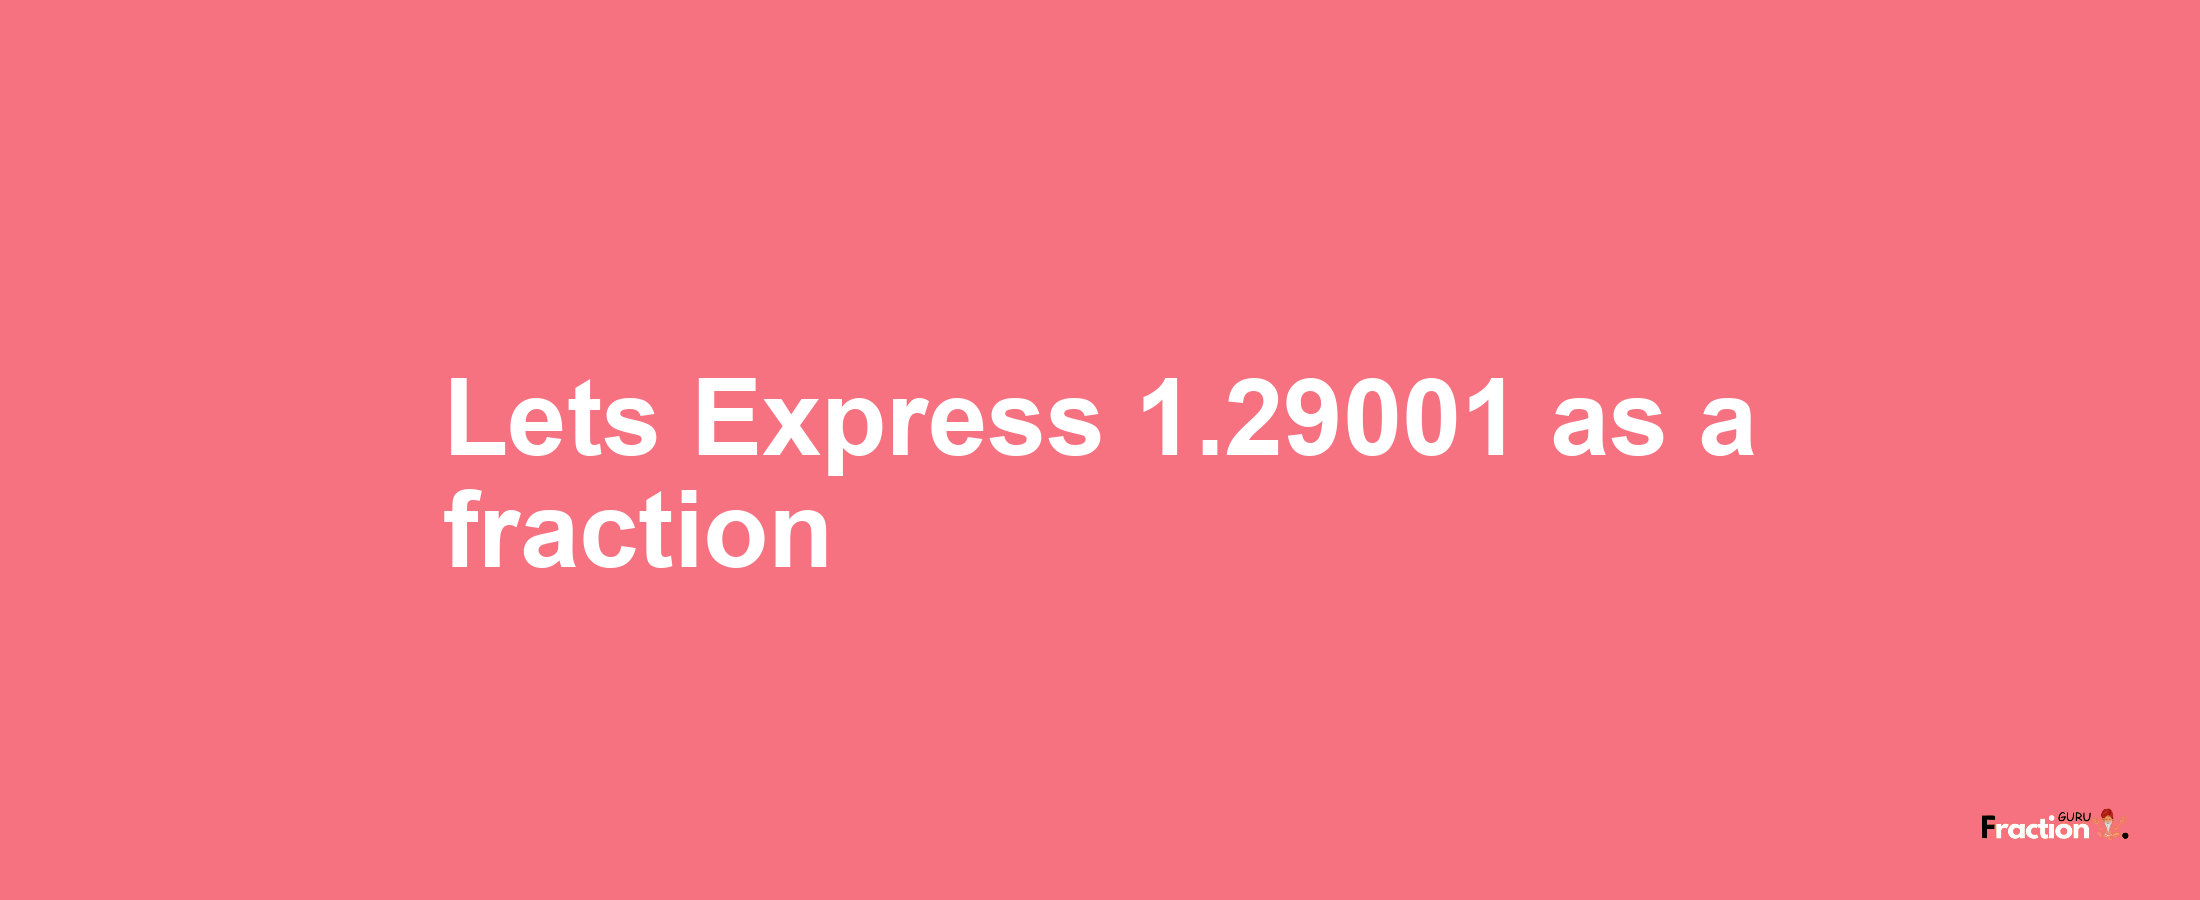 Lets Express 1.29001 as afraction